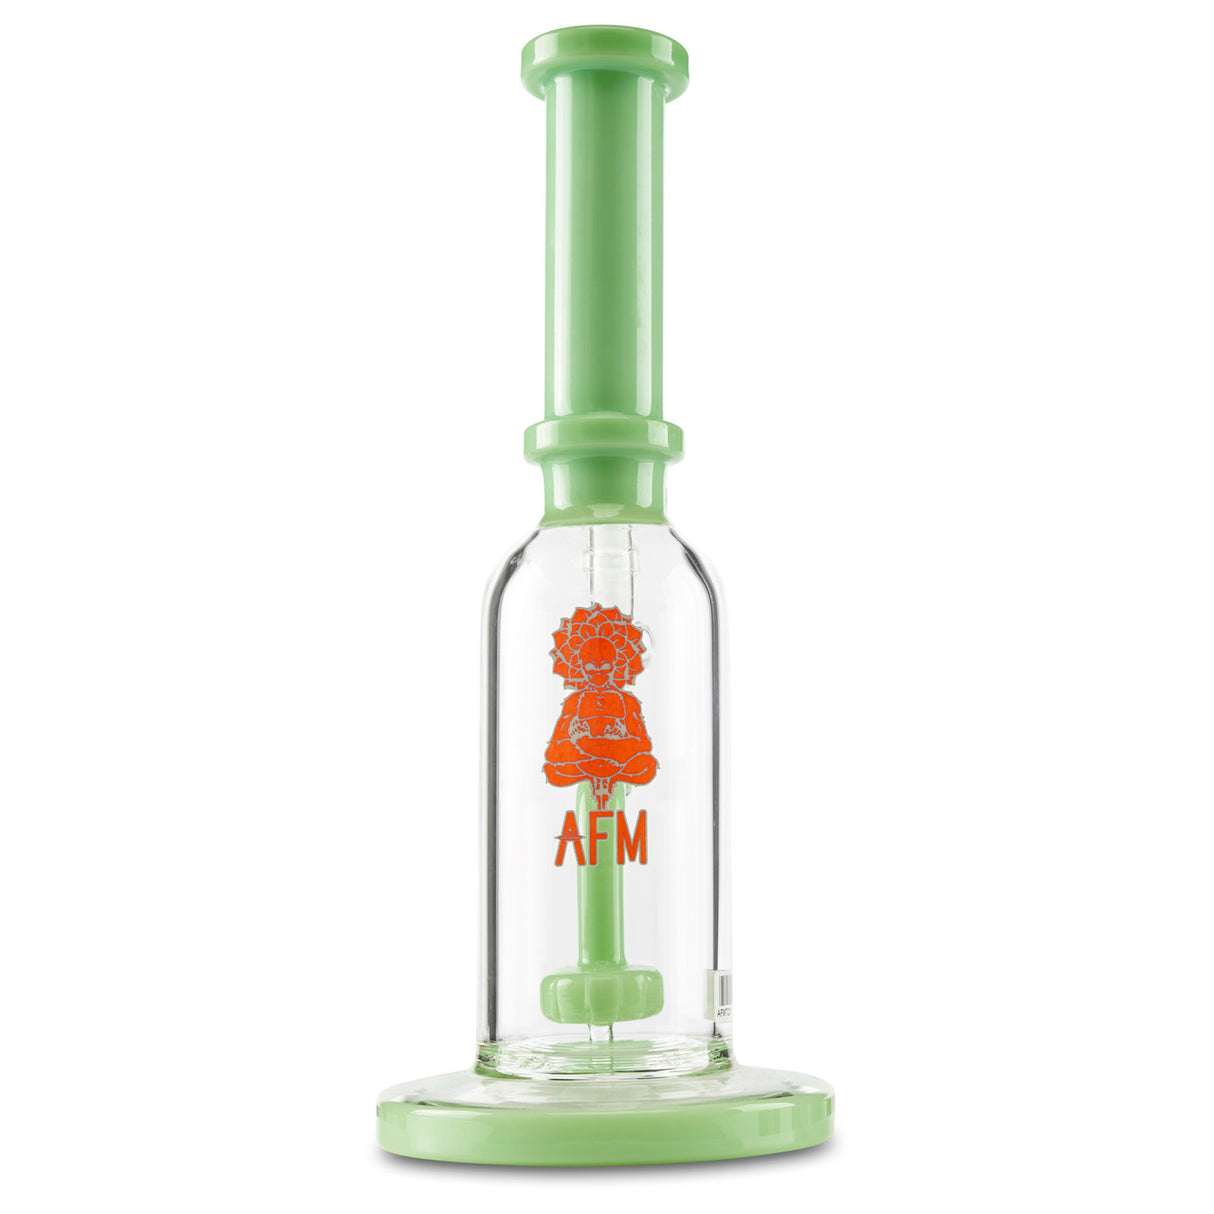 afm showerhead glass water pipe bong with 14mm glass bowl